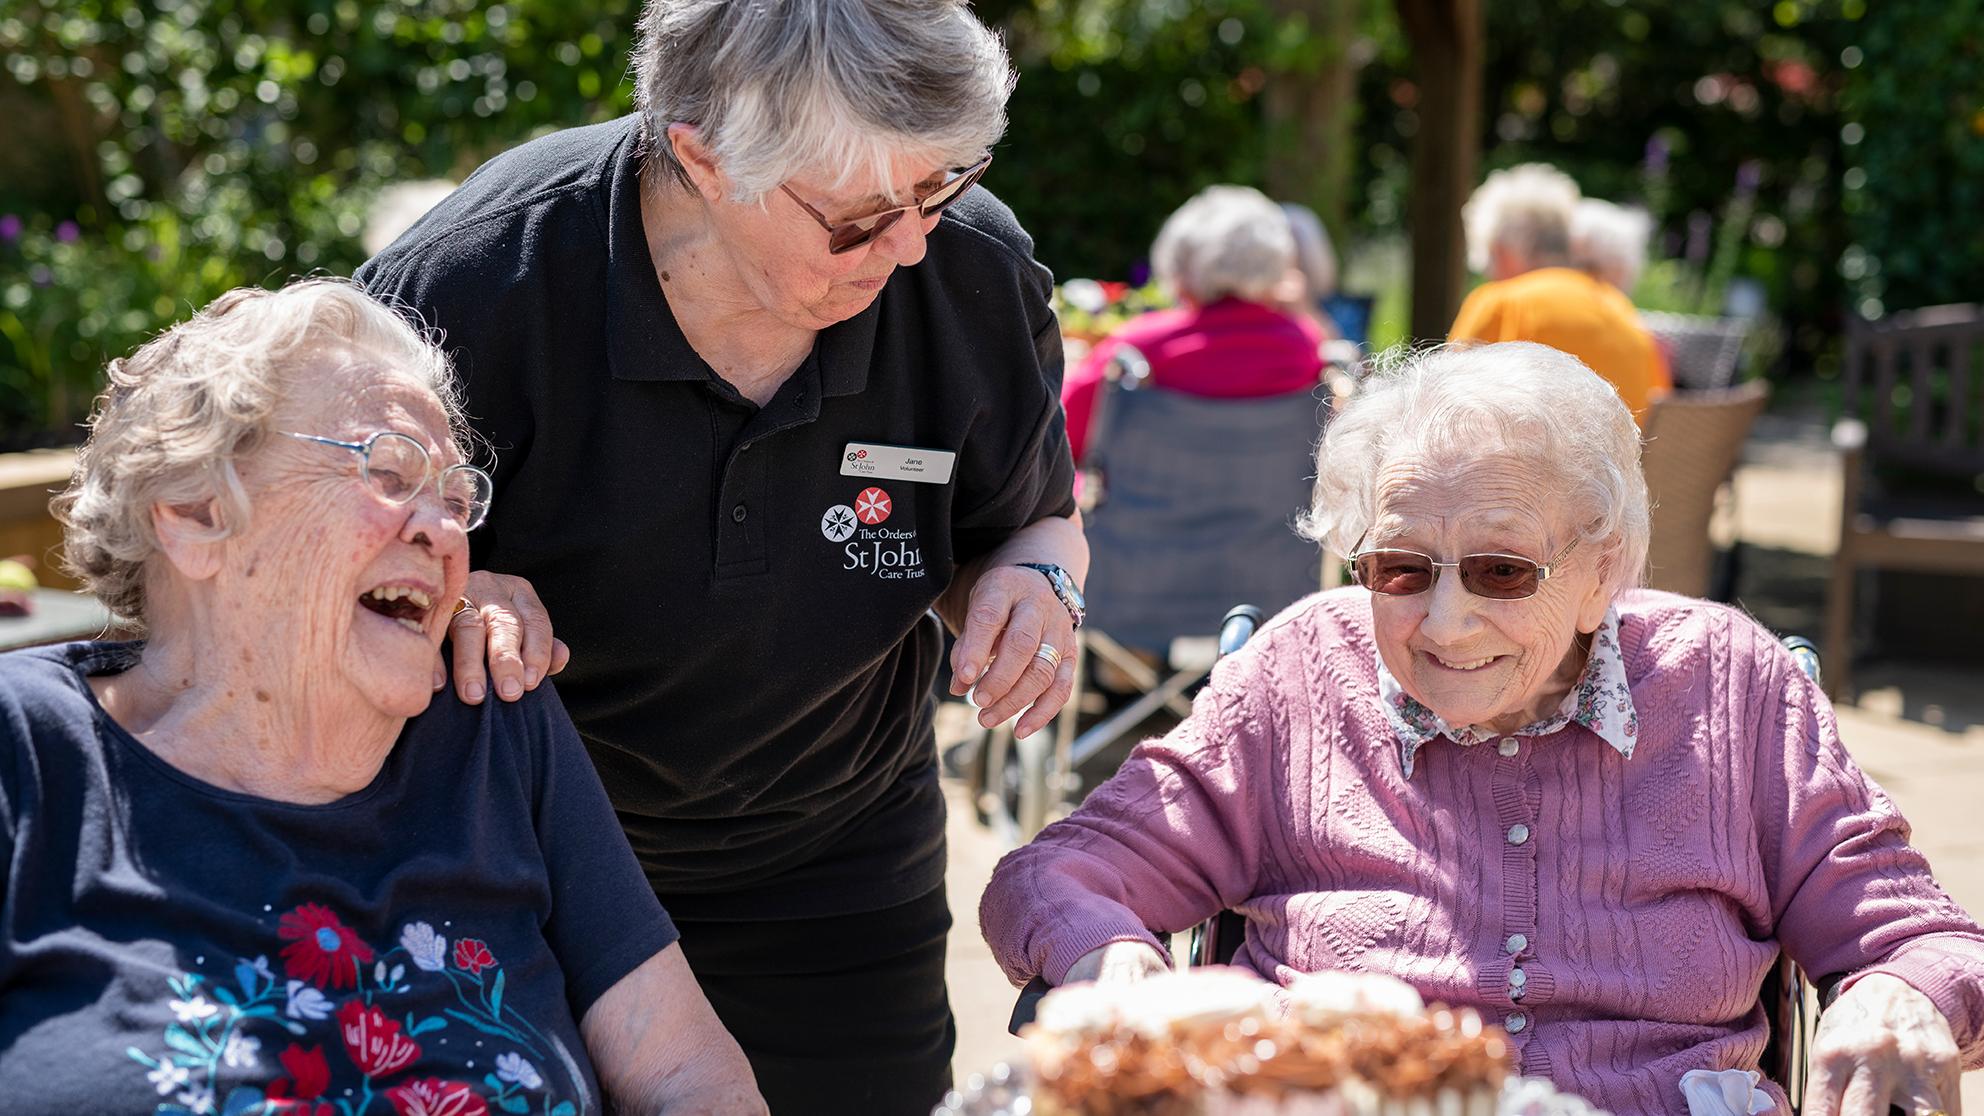 Residents and team member laughing during a sunny garden event